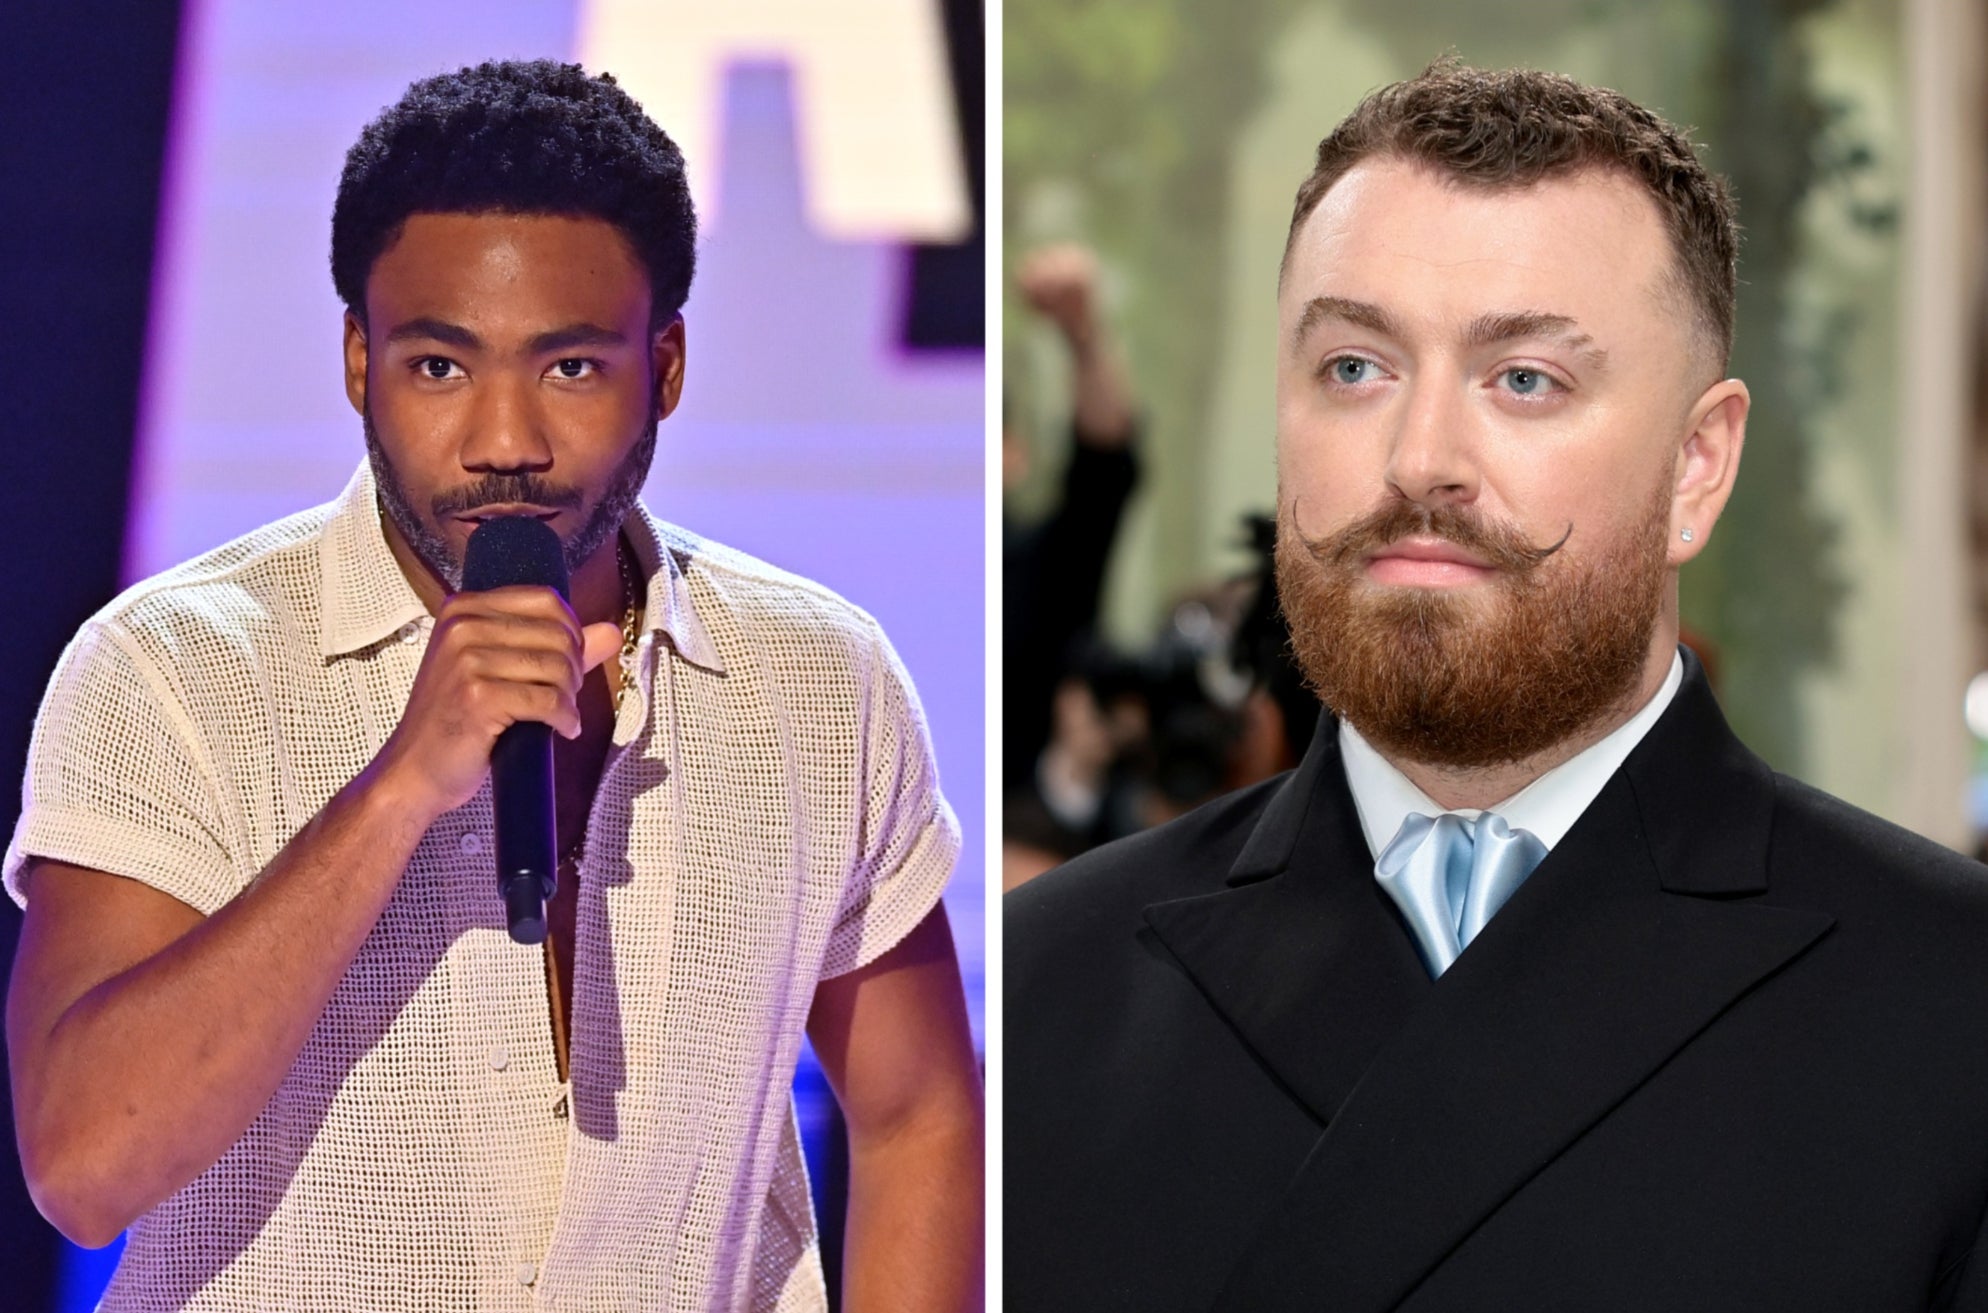 bet awards, sam smith, donald glover, killer mike, childish gambino, donald glover calls out bet for giving sam smith more awards than him